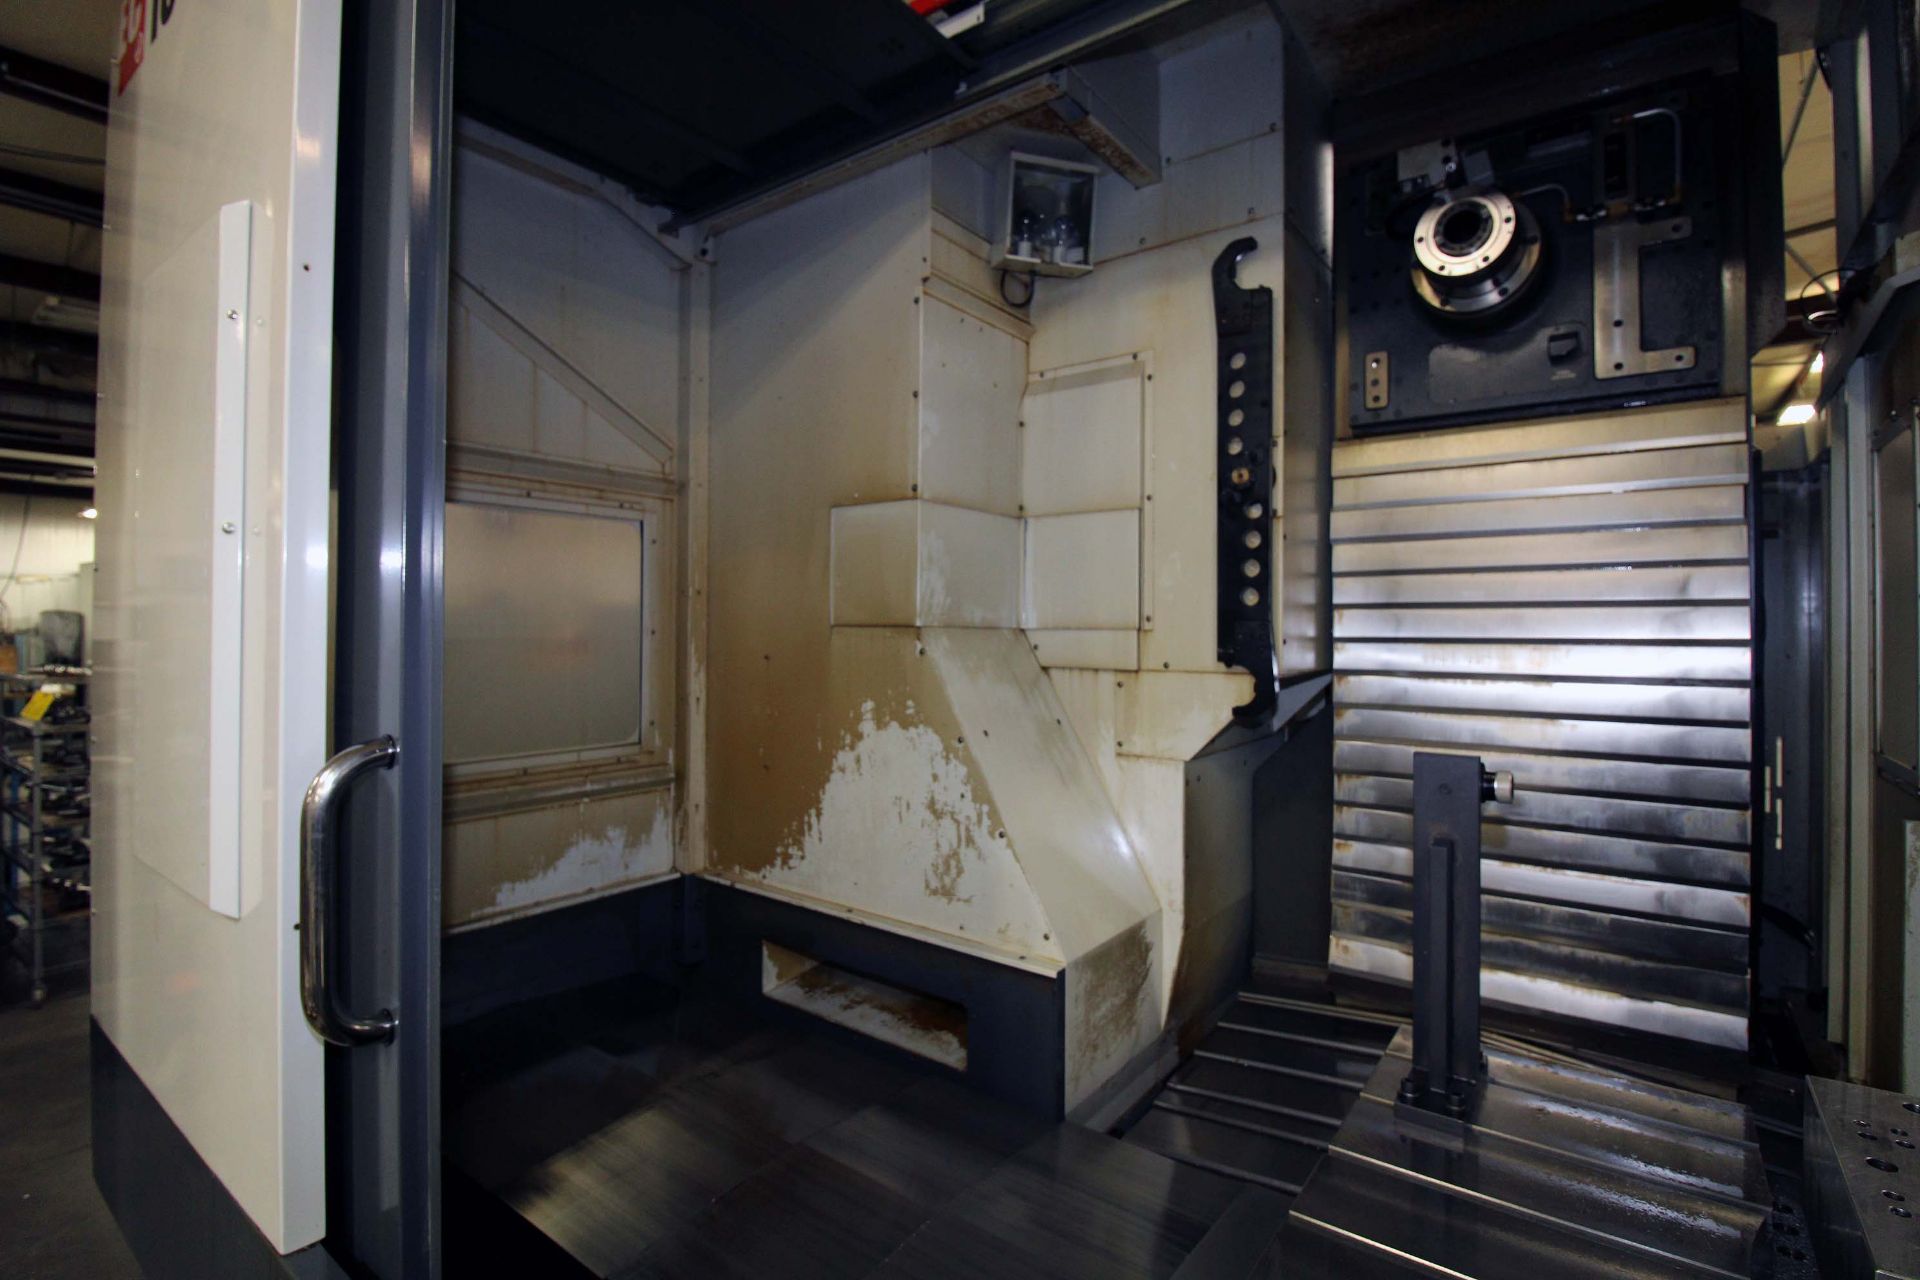 4-AXIS HORIZONTAL MACHINING CENTER, HAAS MDL. EC1600, new 10/2012, 64” x 36” table, 30” built-in - Image 4 of 14